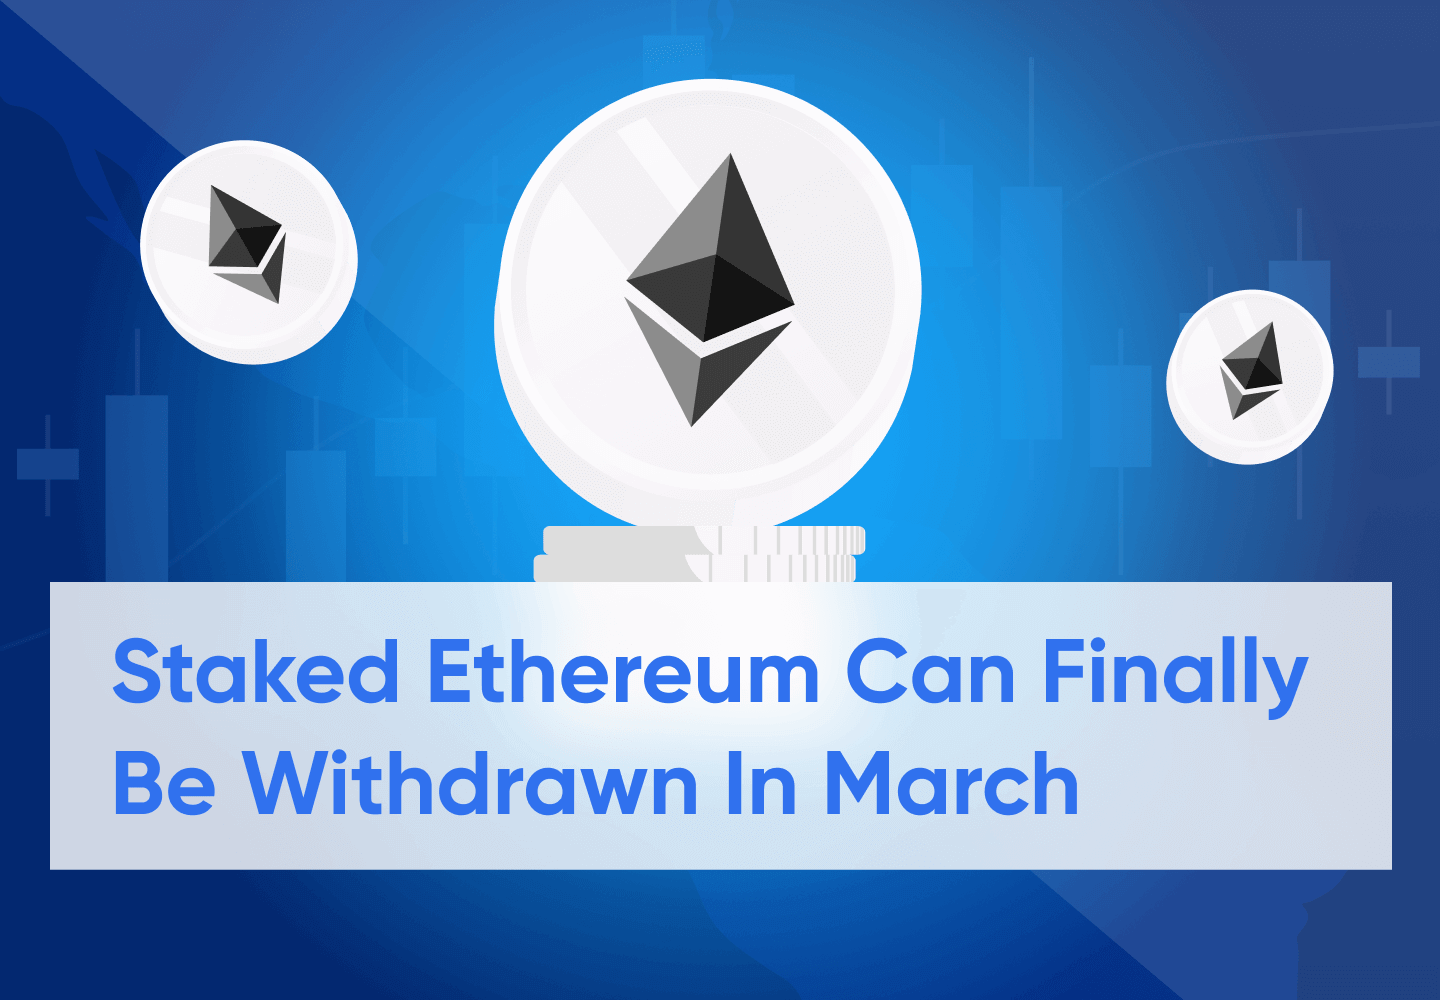 Ethereum to Allow Withdrawal of Staked Assets in March 2023